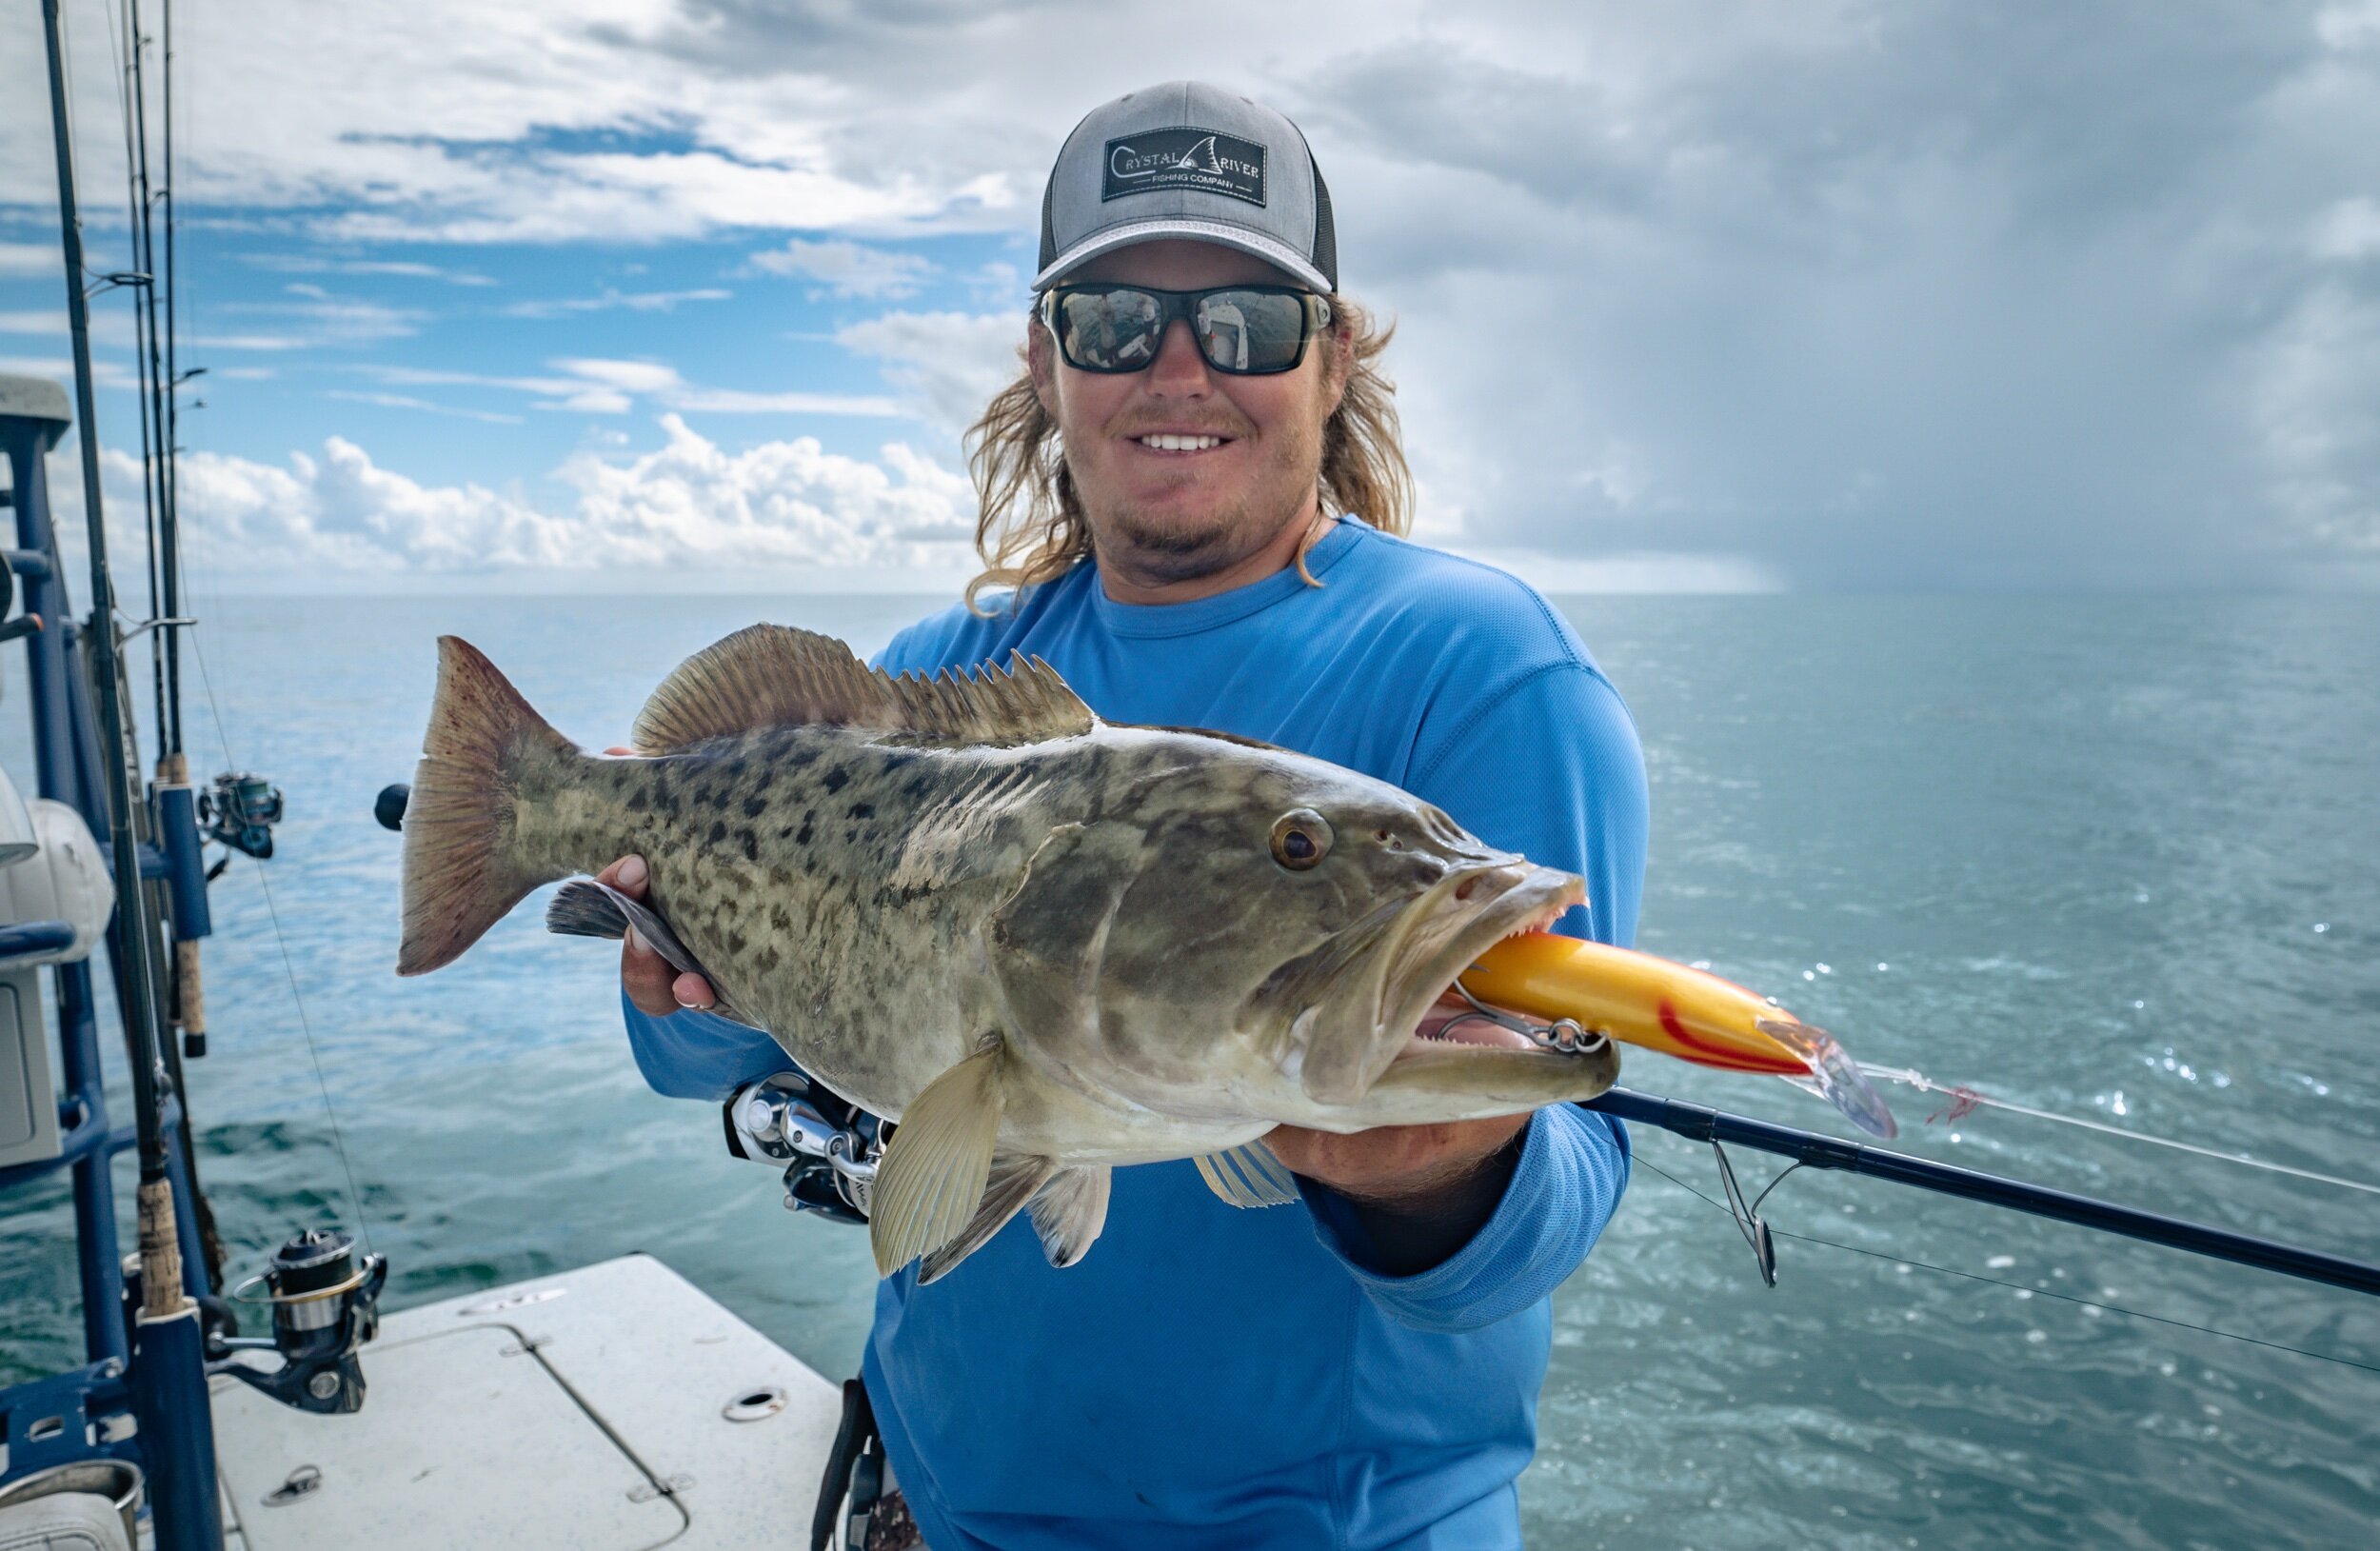 ABOUT — CRYSTAL RIVER FISHING COMPANY